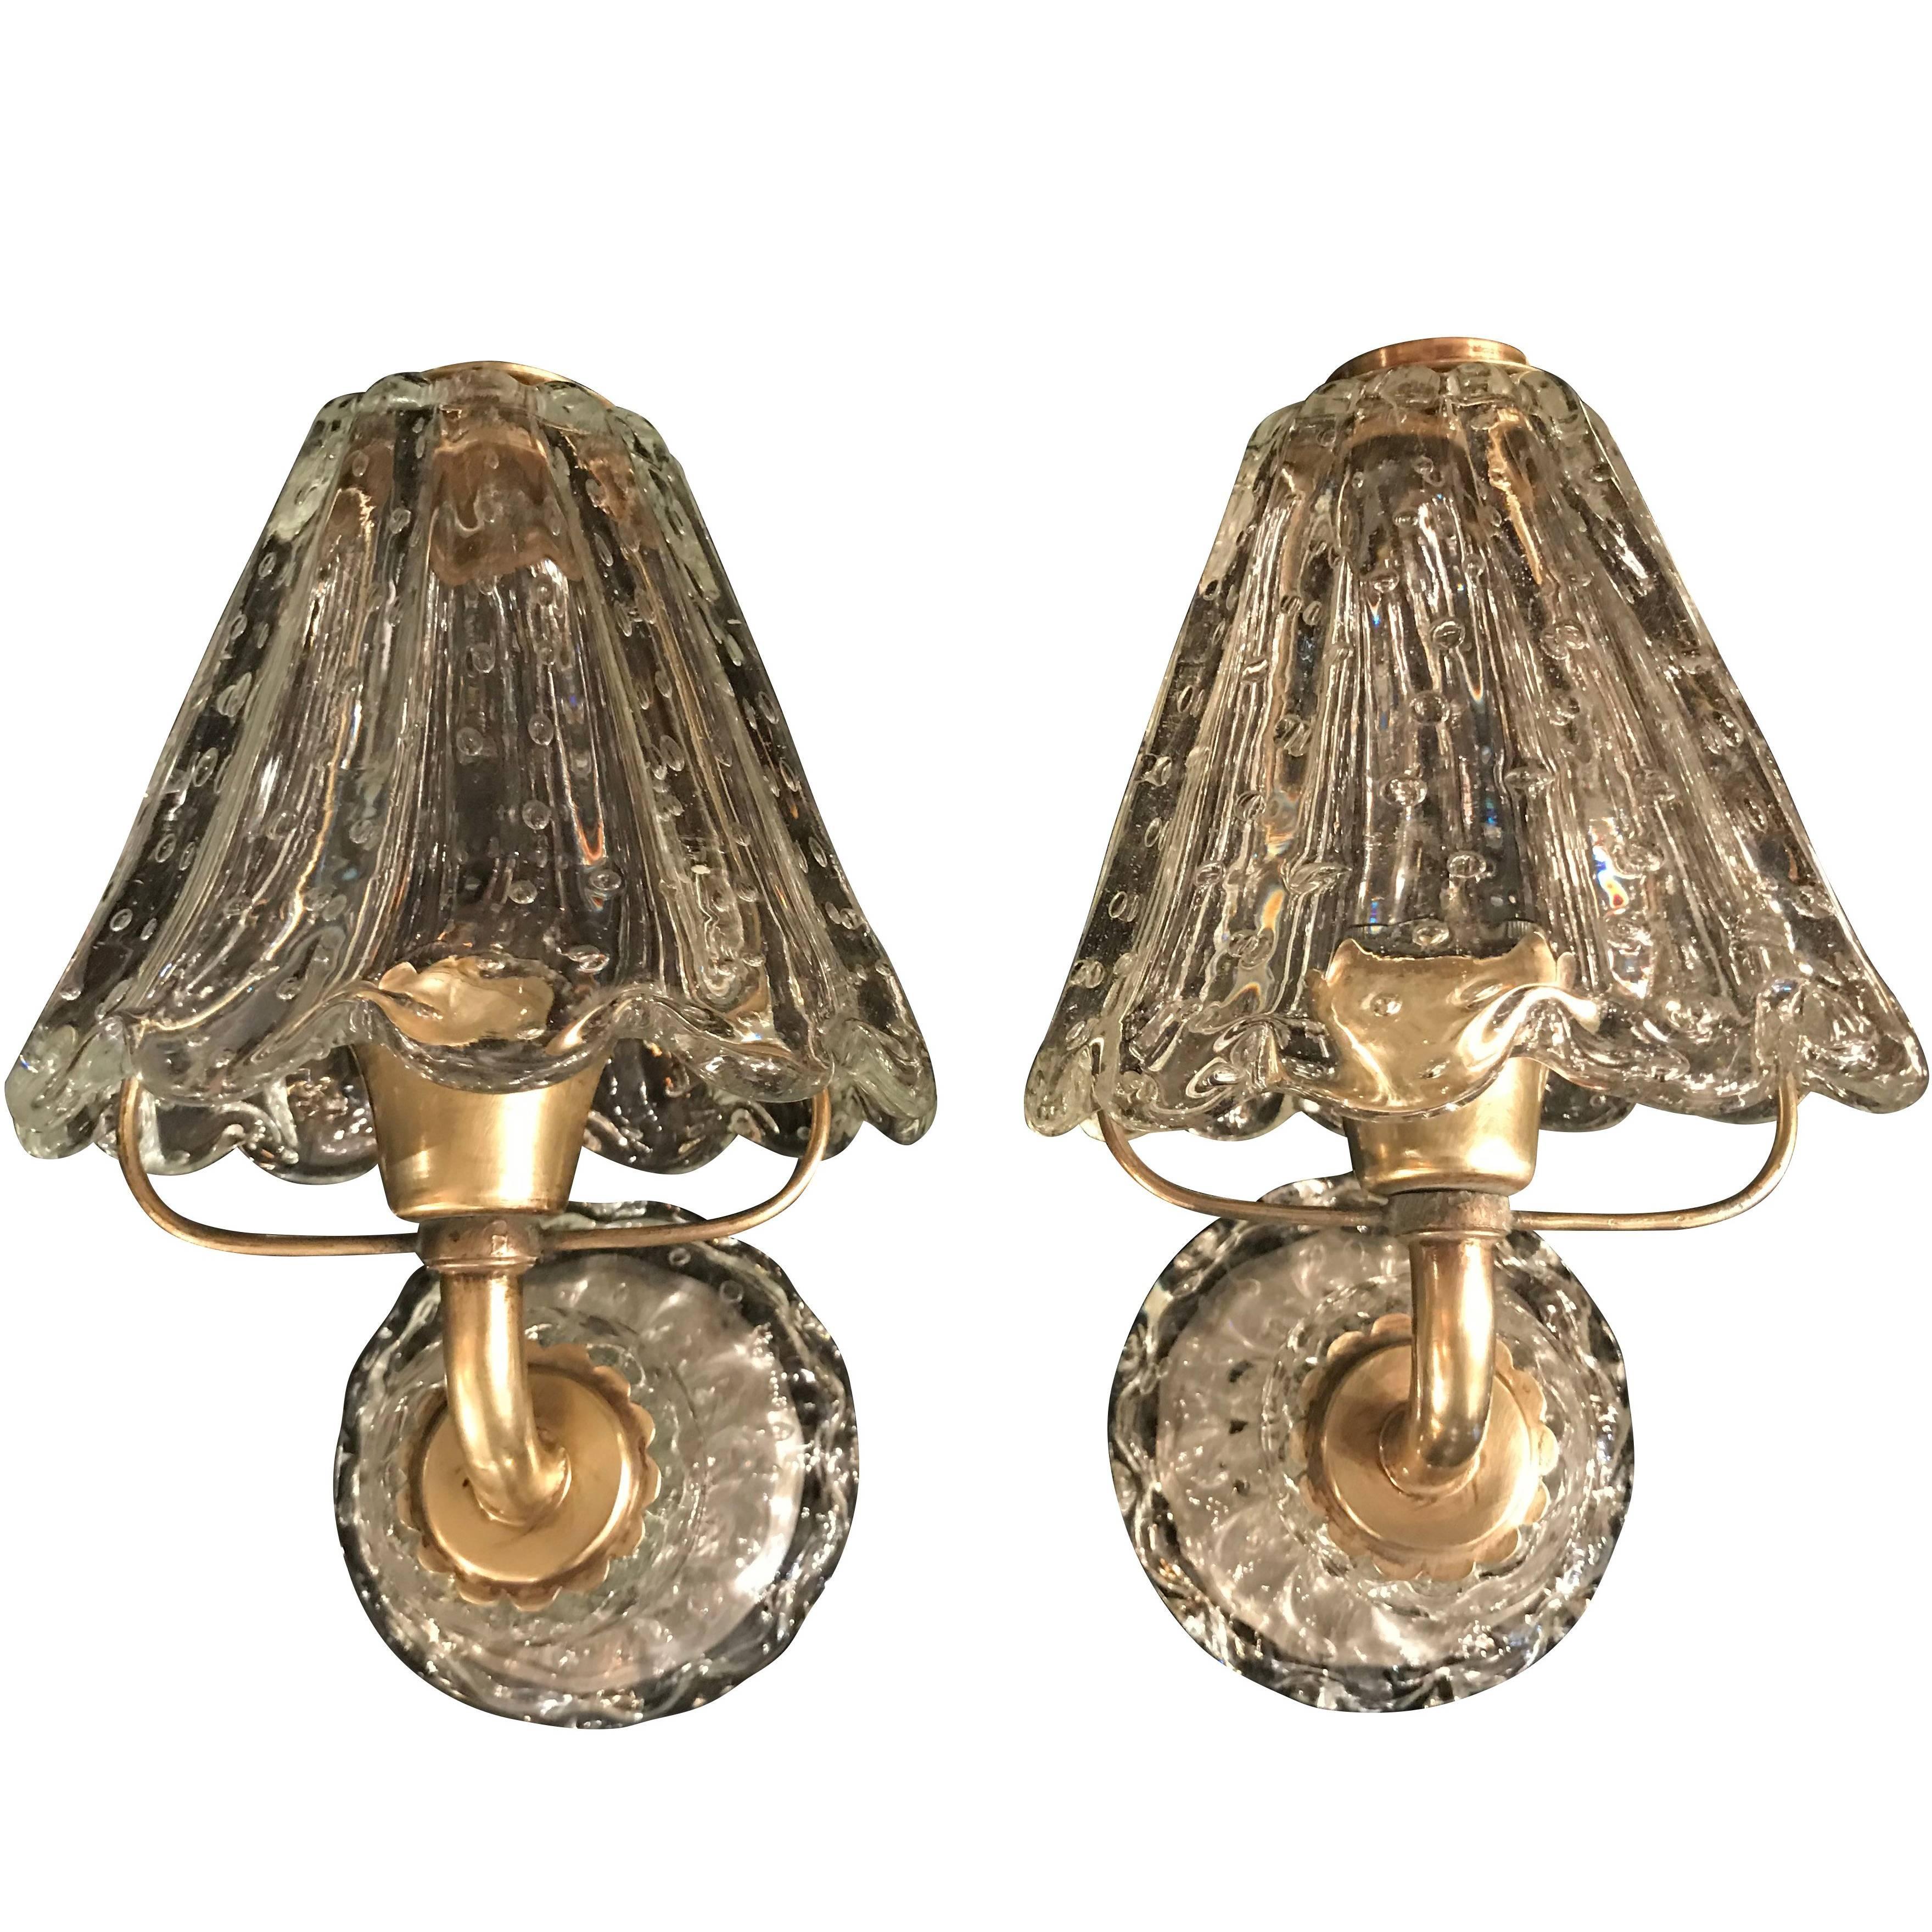 Pair of Barovier and Tosa Wall Sconces